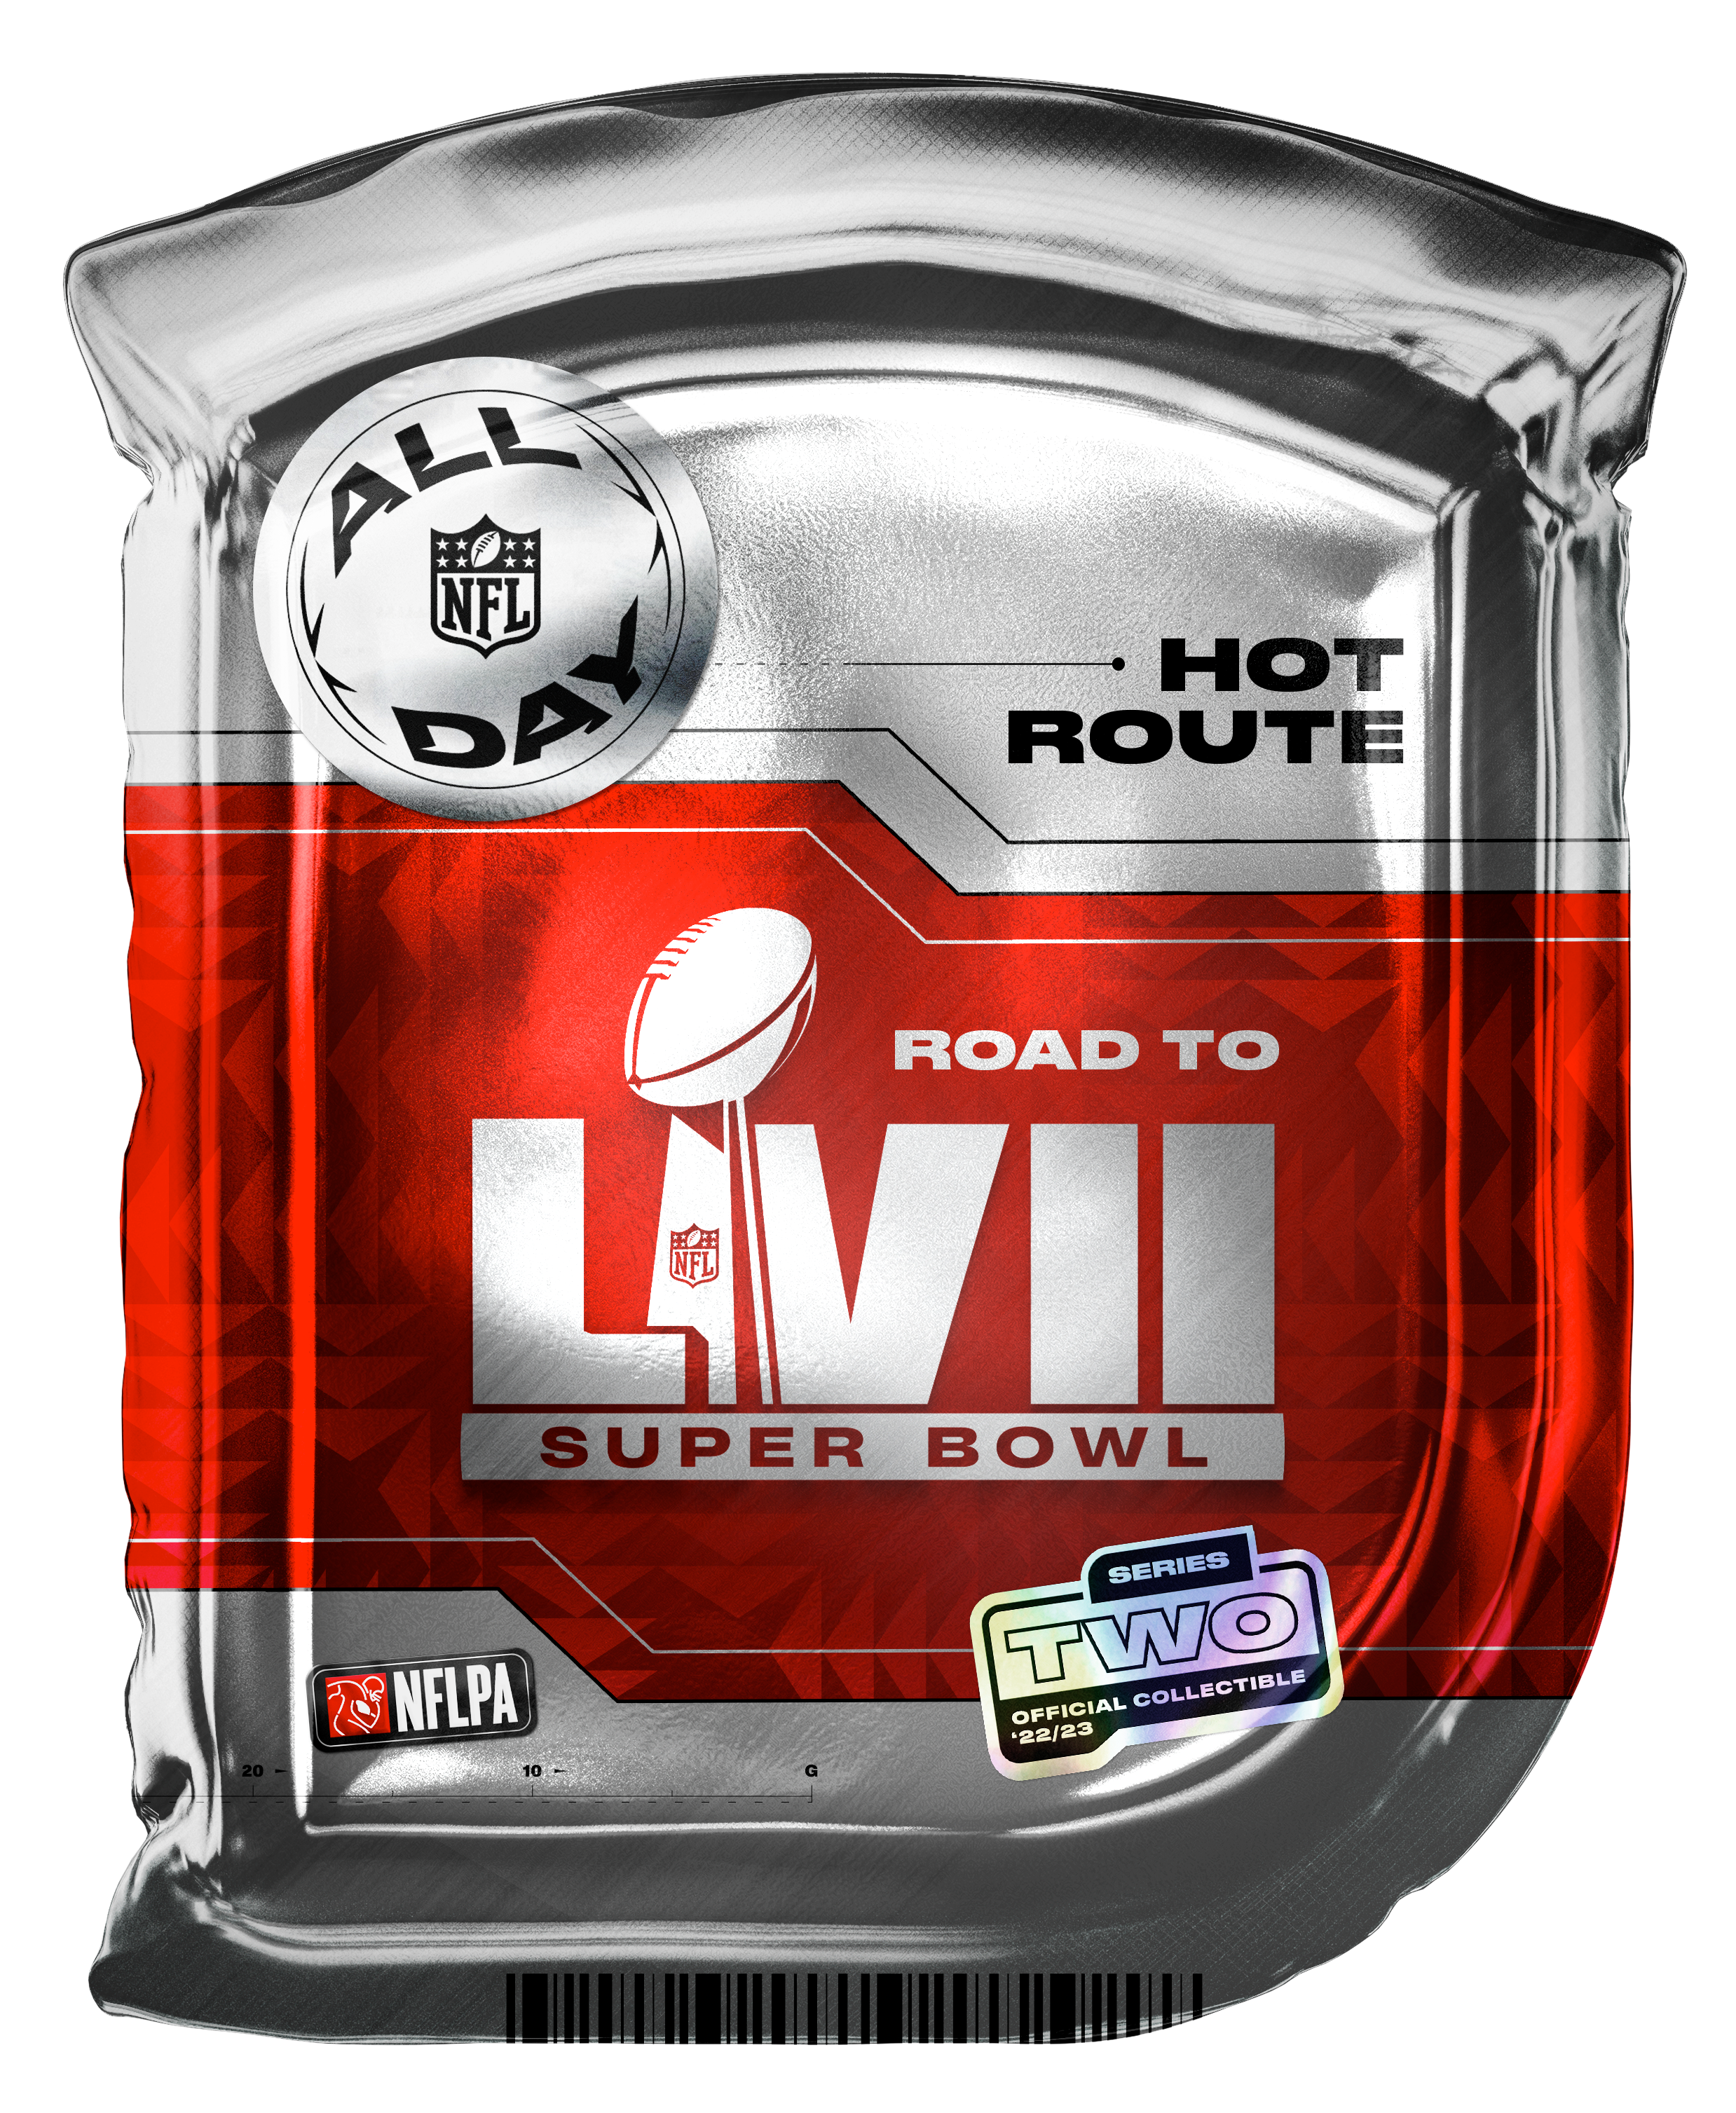 Road to Super Bowl LVII (Hot Route)